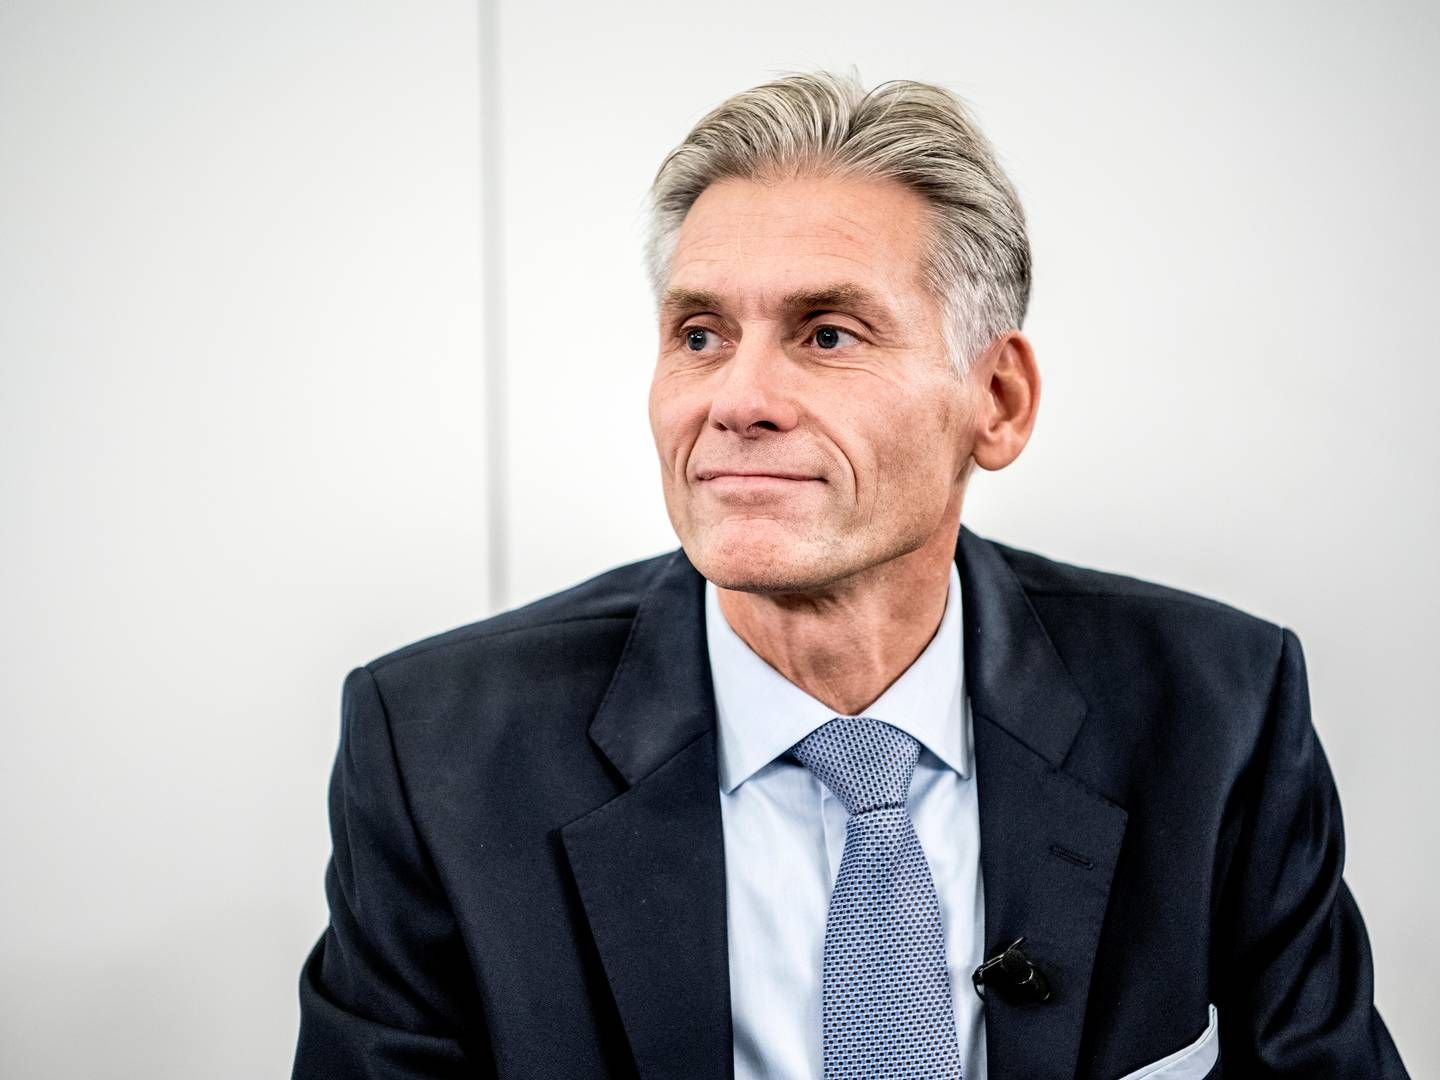 Thomas F. Borgen was CEO of Danske Bank from 2013 to 2018 before a highly publicized money laundering case forced him to resign. | Foto: Stine Bidstrup/Ritzau/Ritzau Scanpix